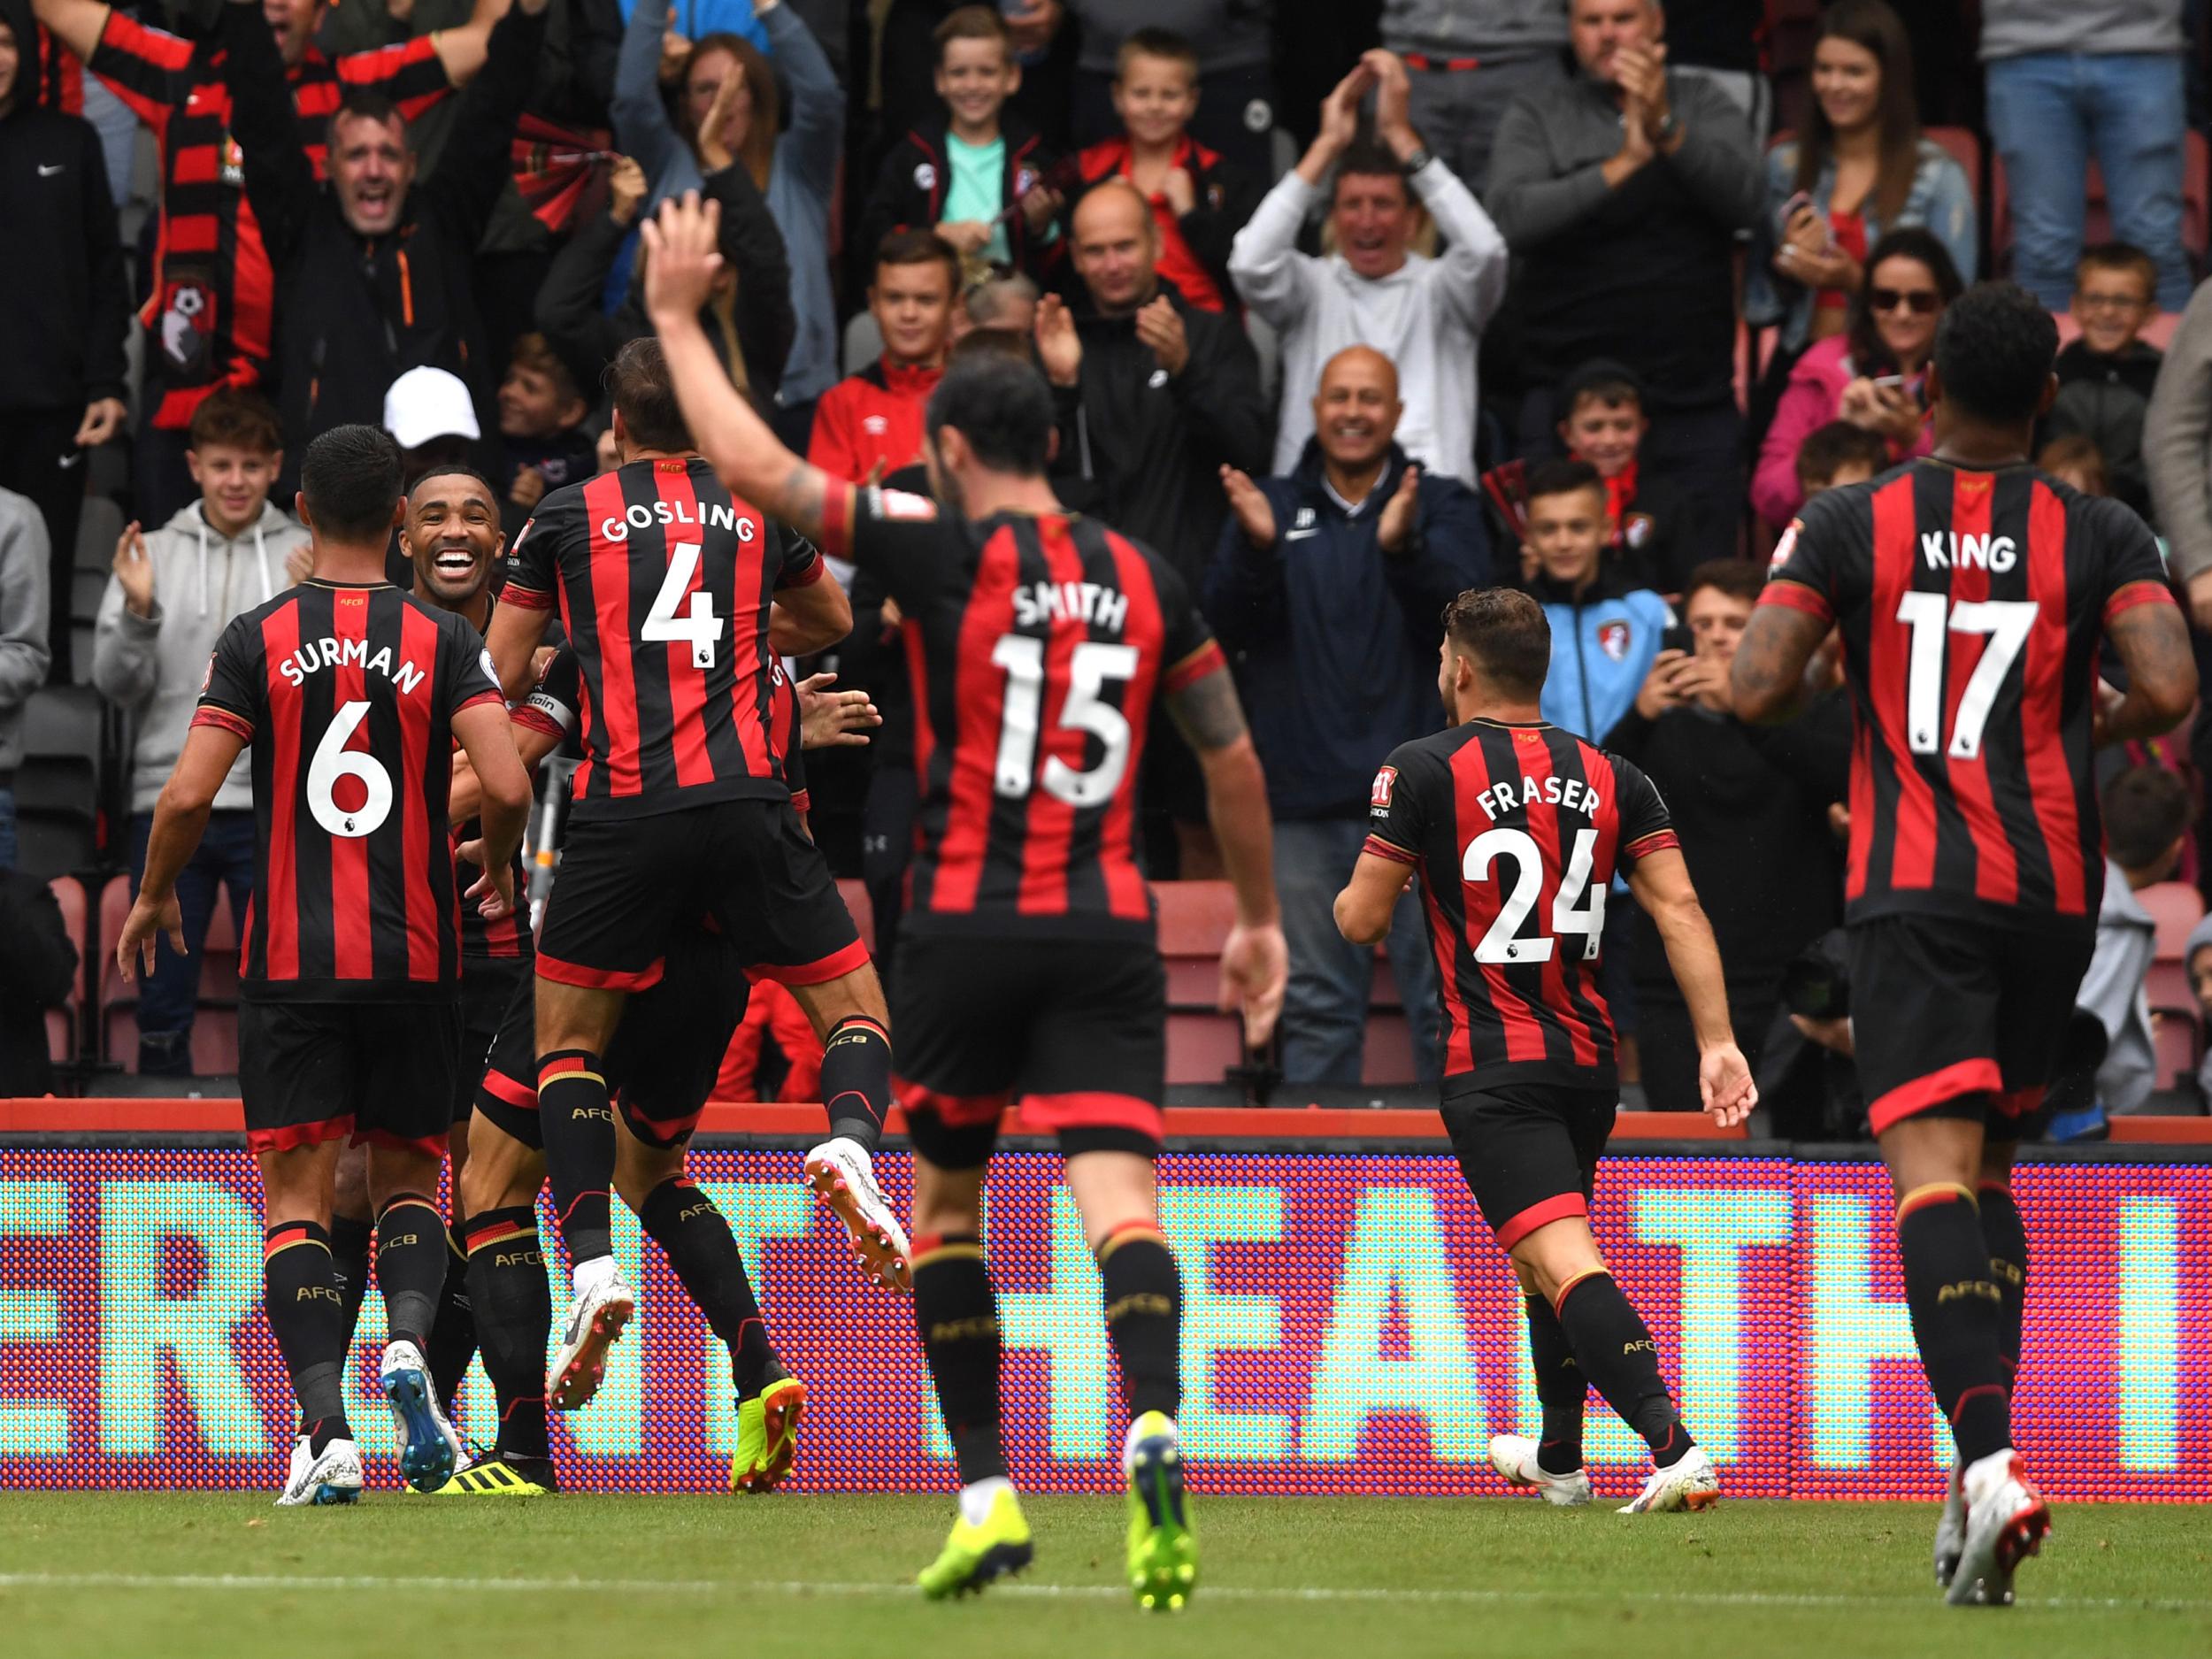 Bournemouth beat Cardiff 2-0 in their opening game